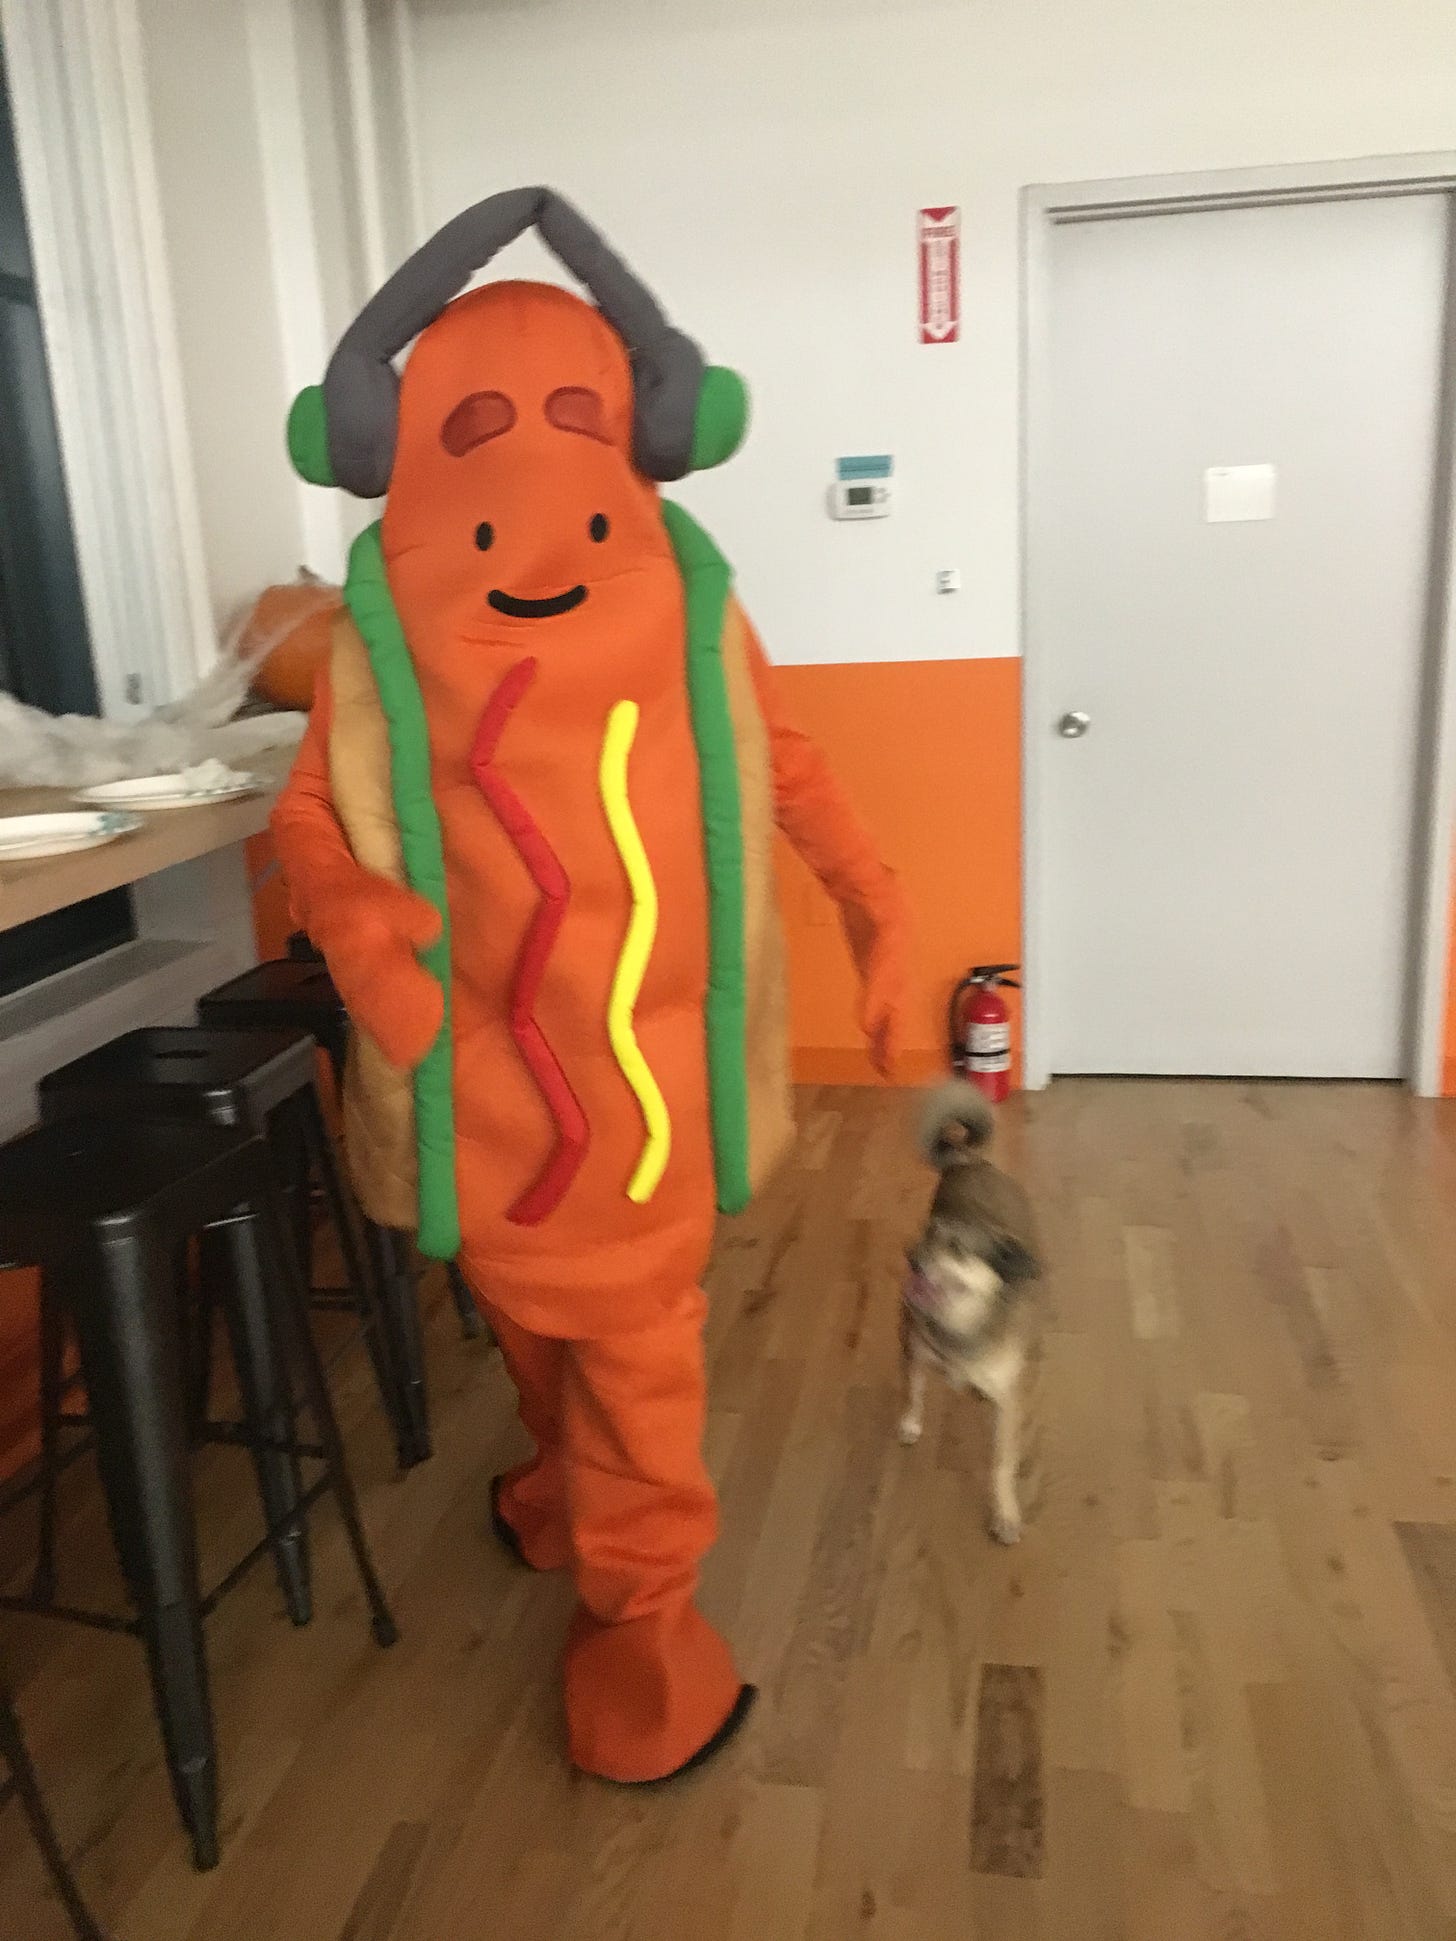 A person in a Snapchat Dancing Hot Dog Halloween costume runs away from a small dog in an office environment.